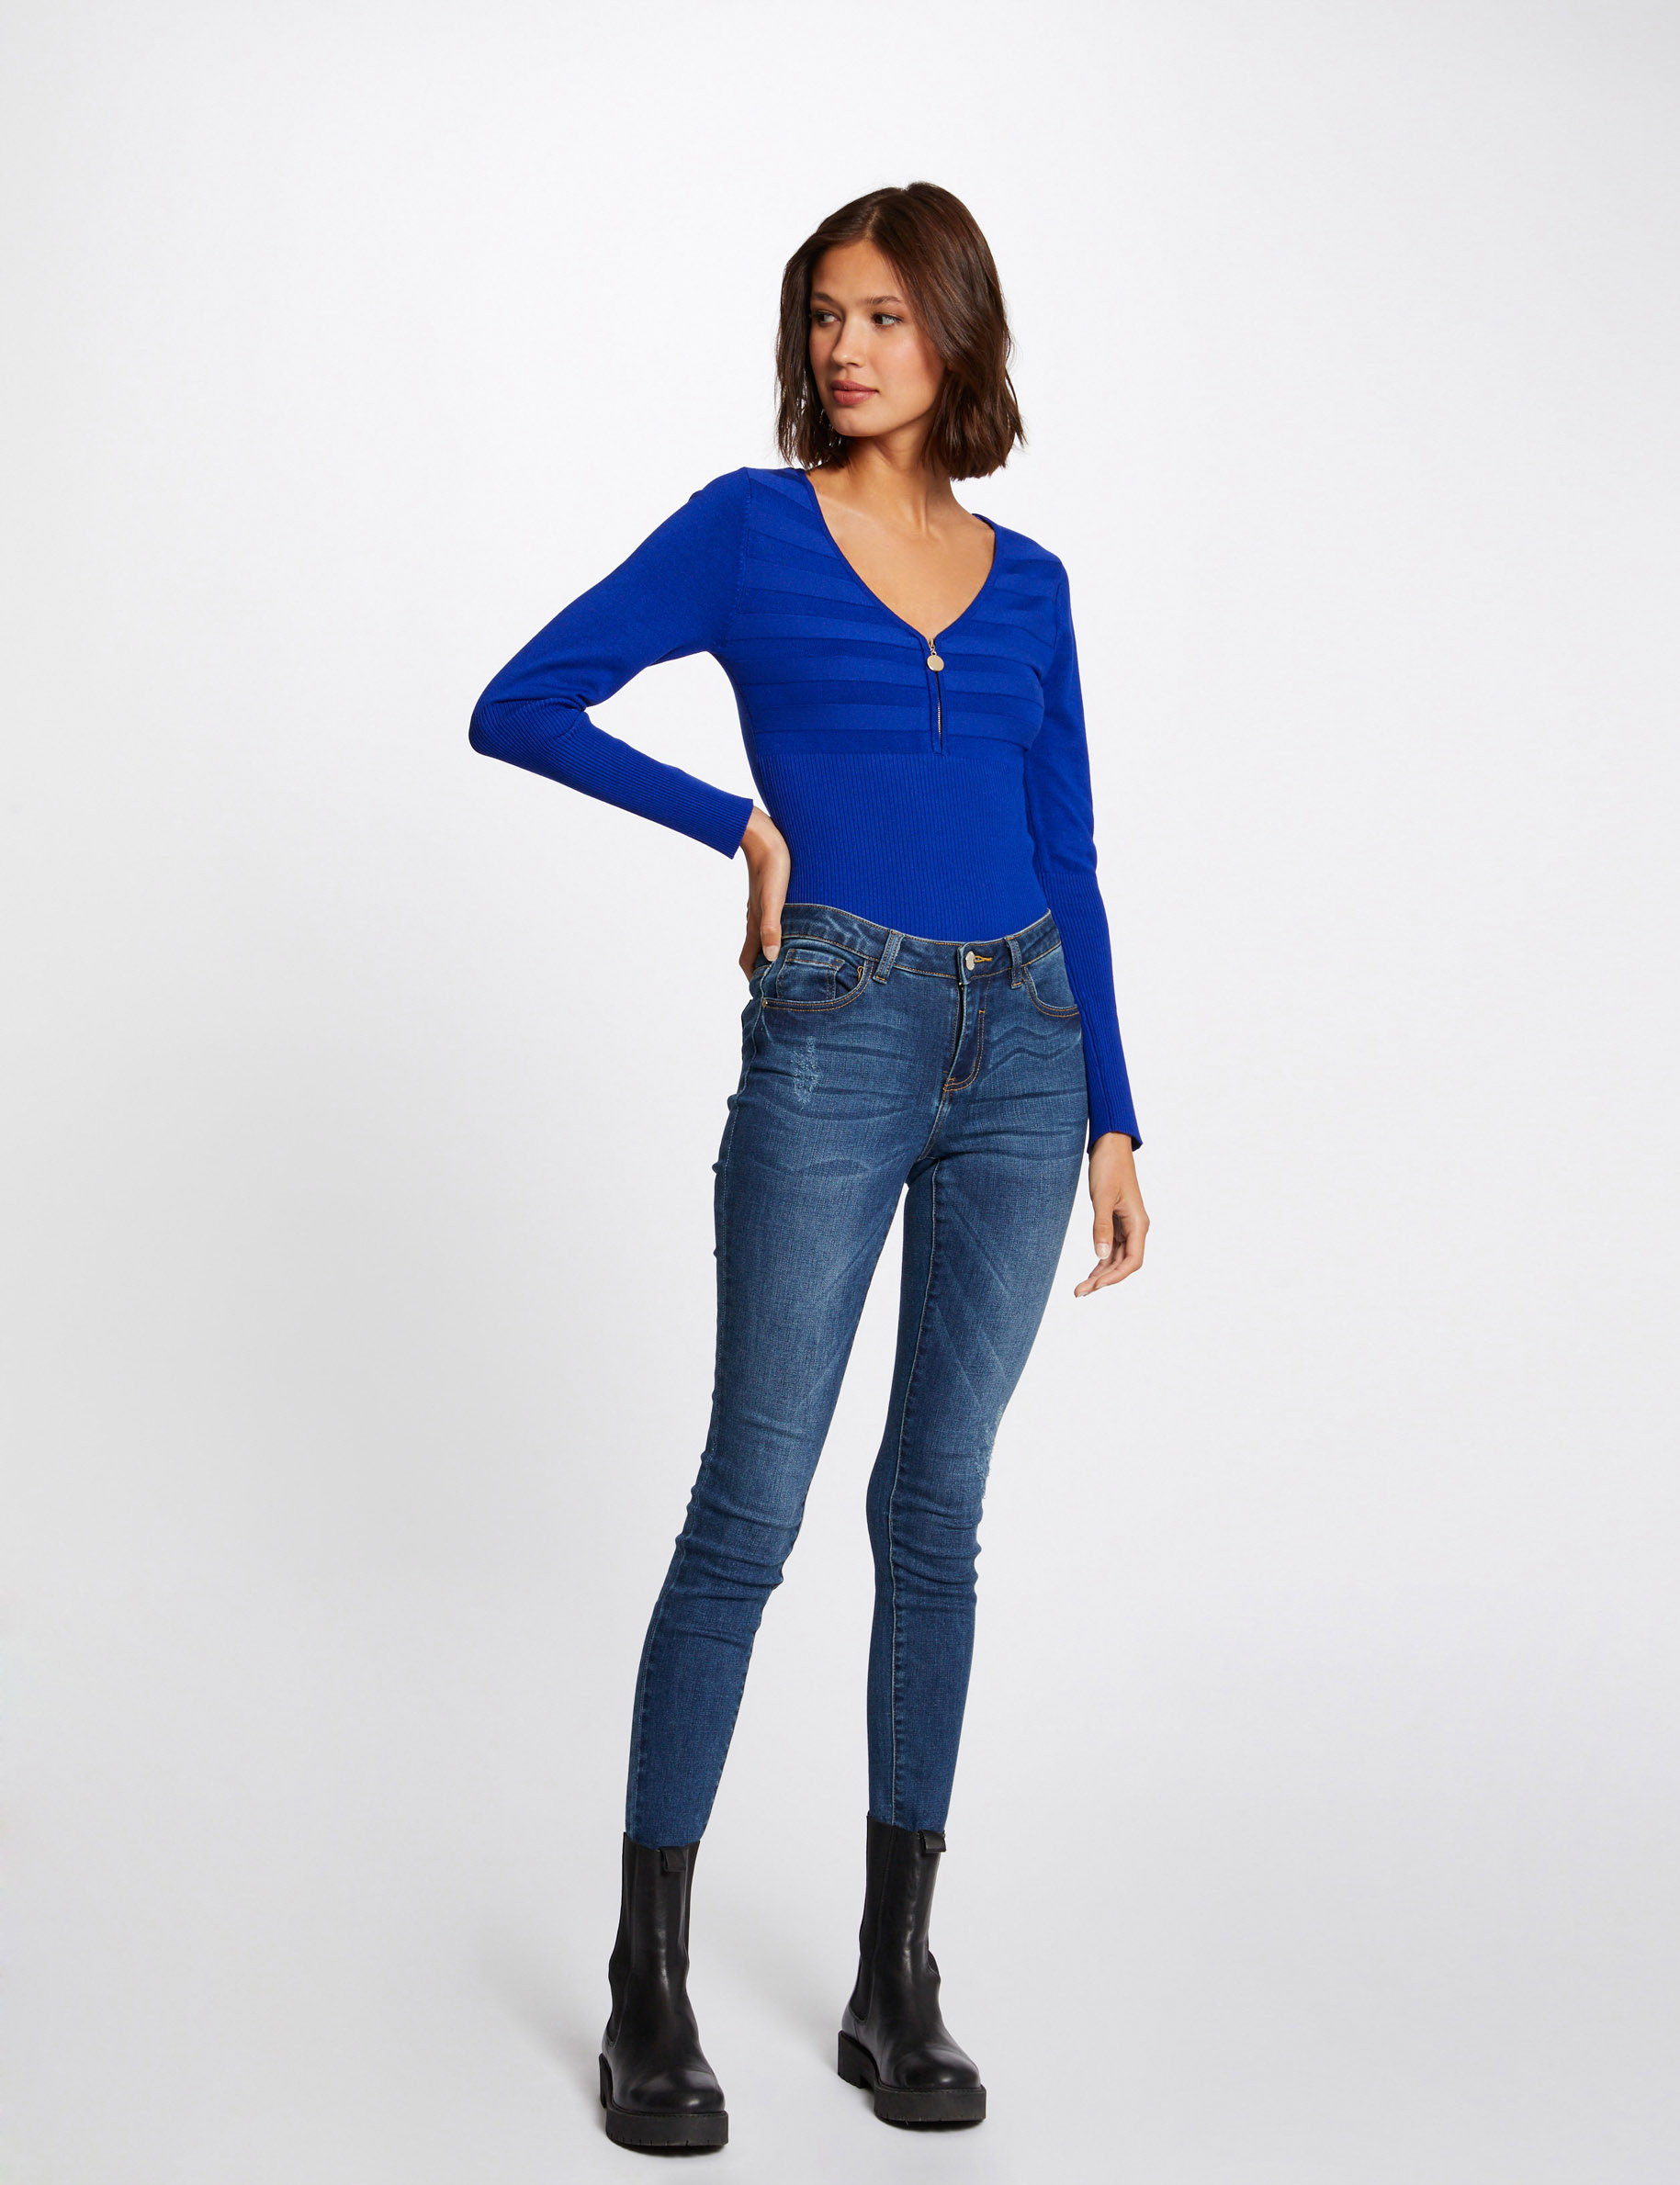 Long-sleeved jumper with zipped detail electric blue ladies'